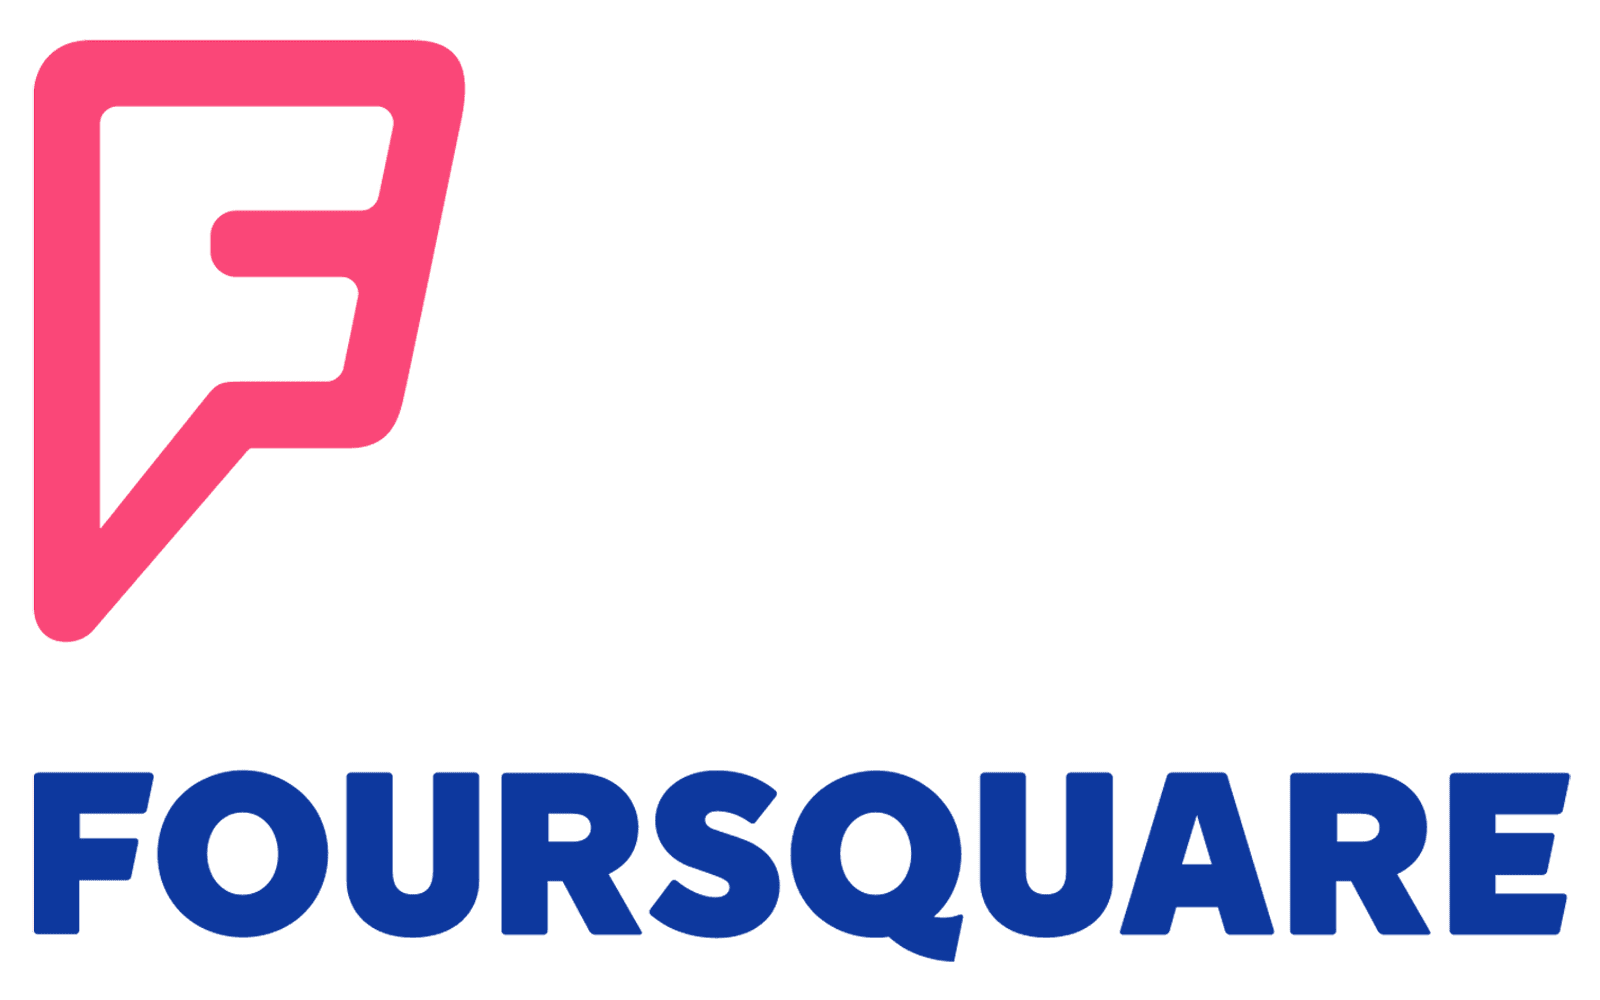 Bye-Bye Superhero 'F' - Foursquare Gets A Redesign | DeviceDaily.com